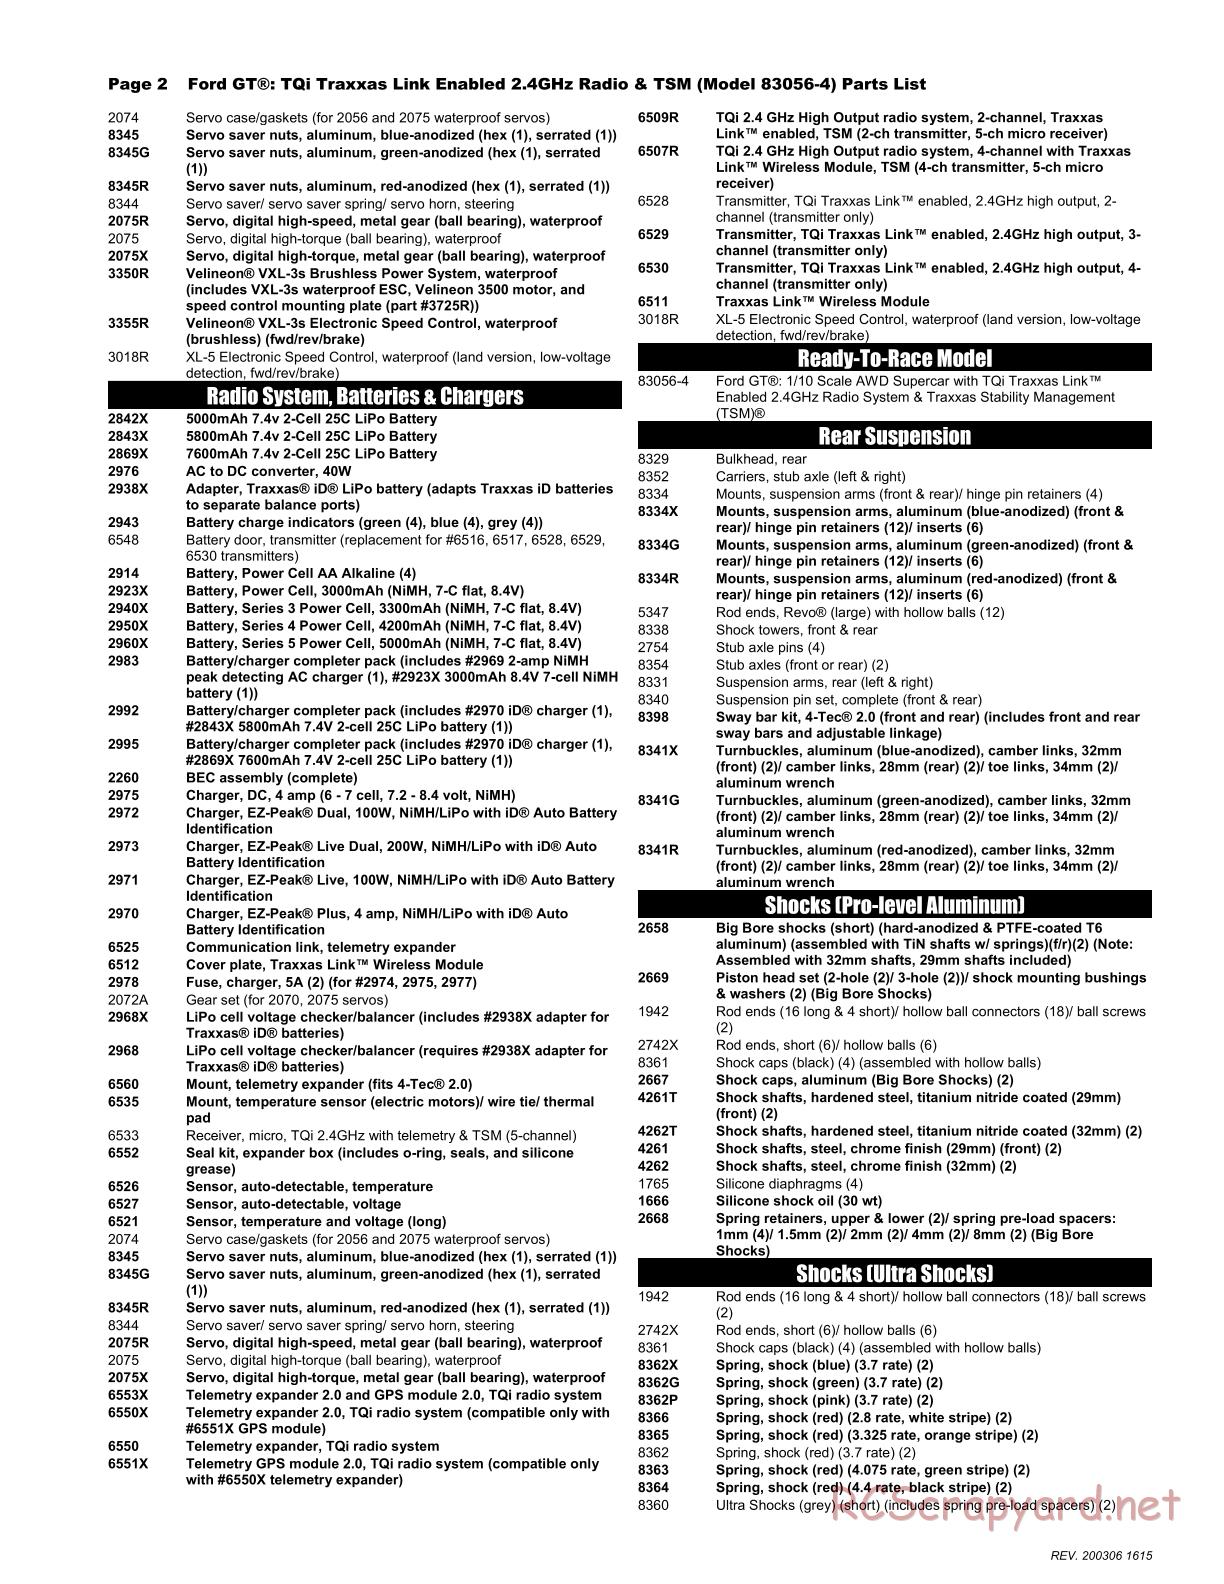 Traxxas - Ford GT - Parts List - Page 2